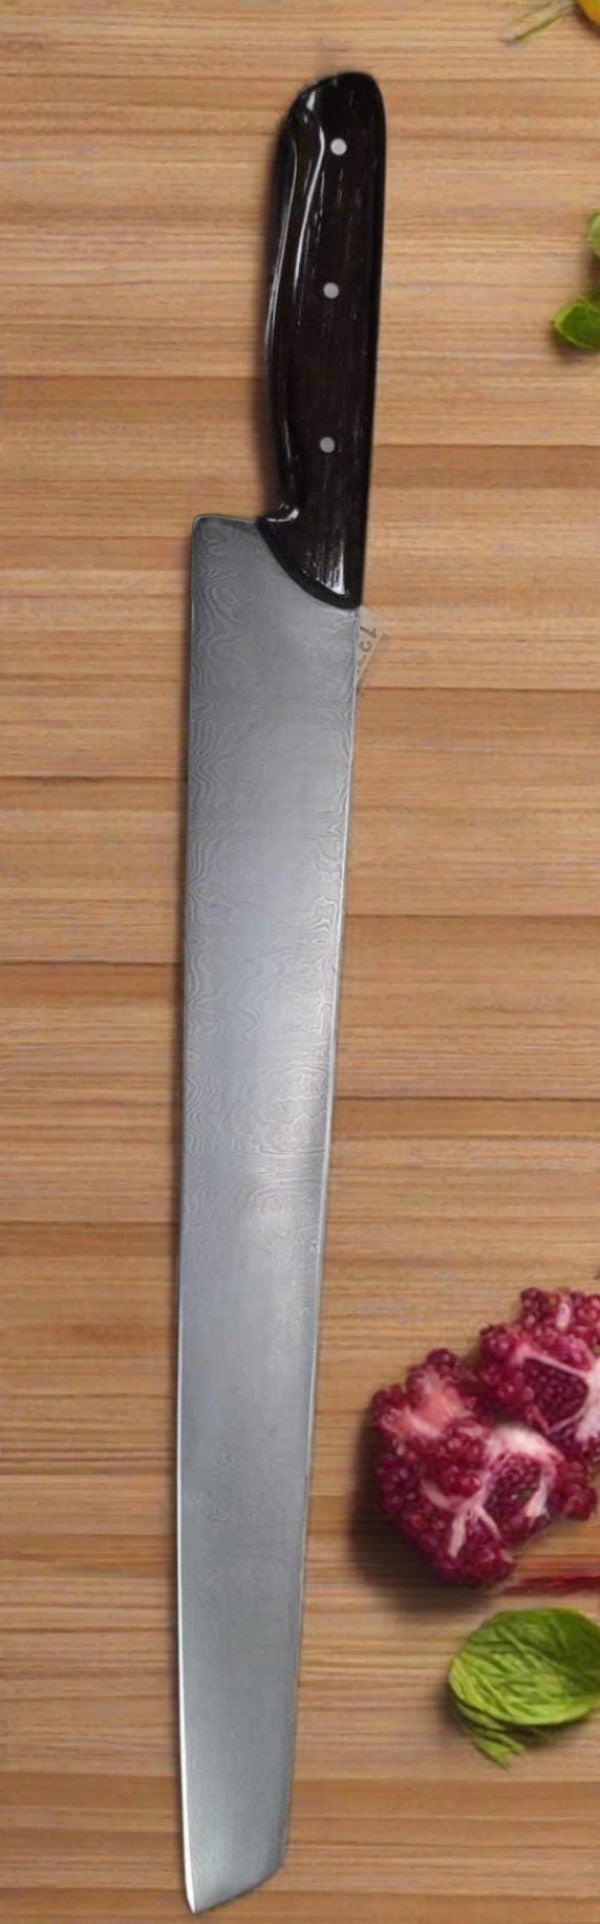 Locally Made Butcher Knife